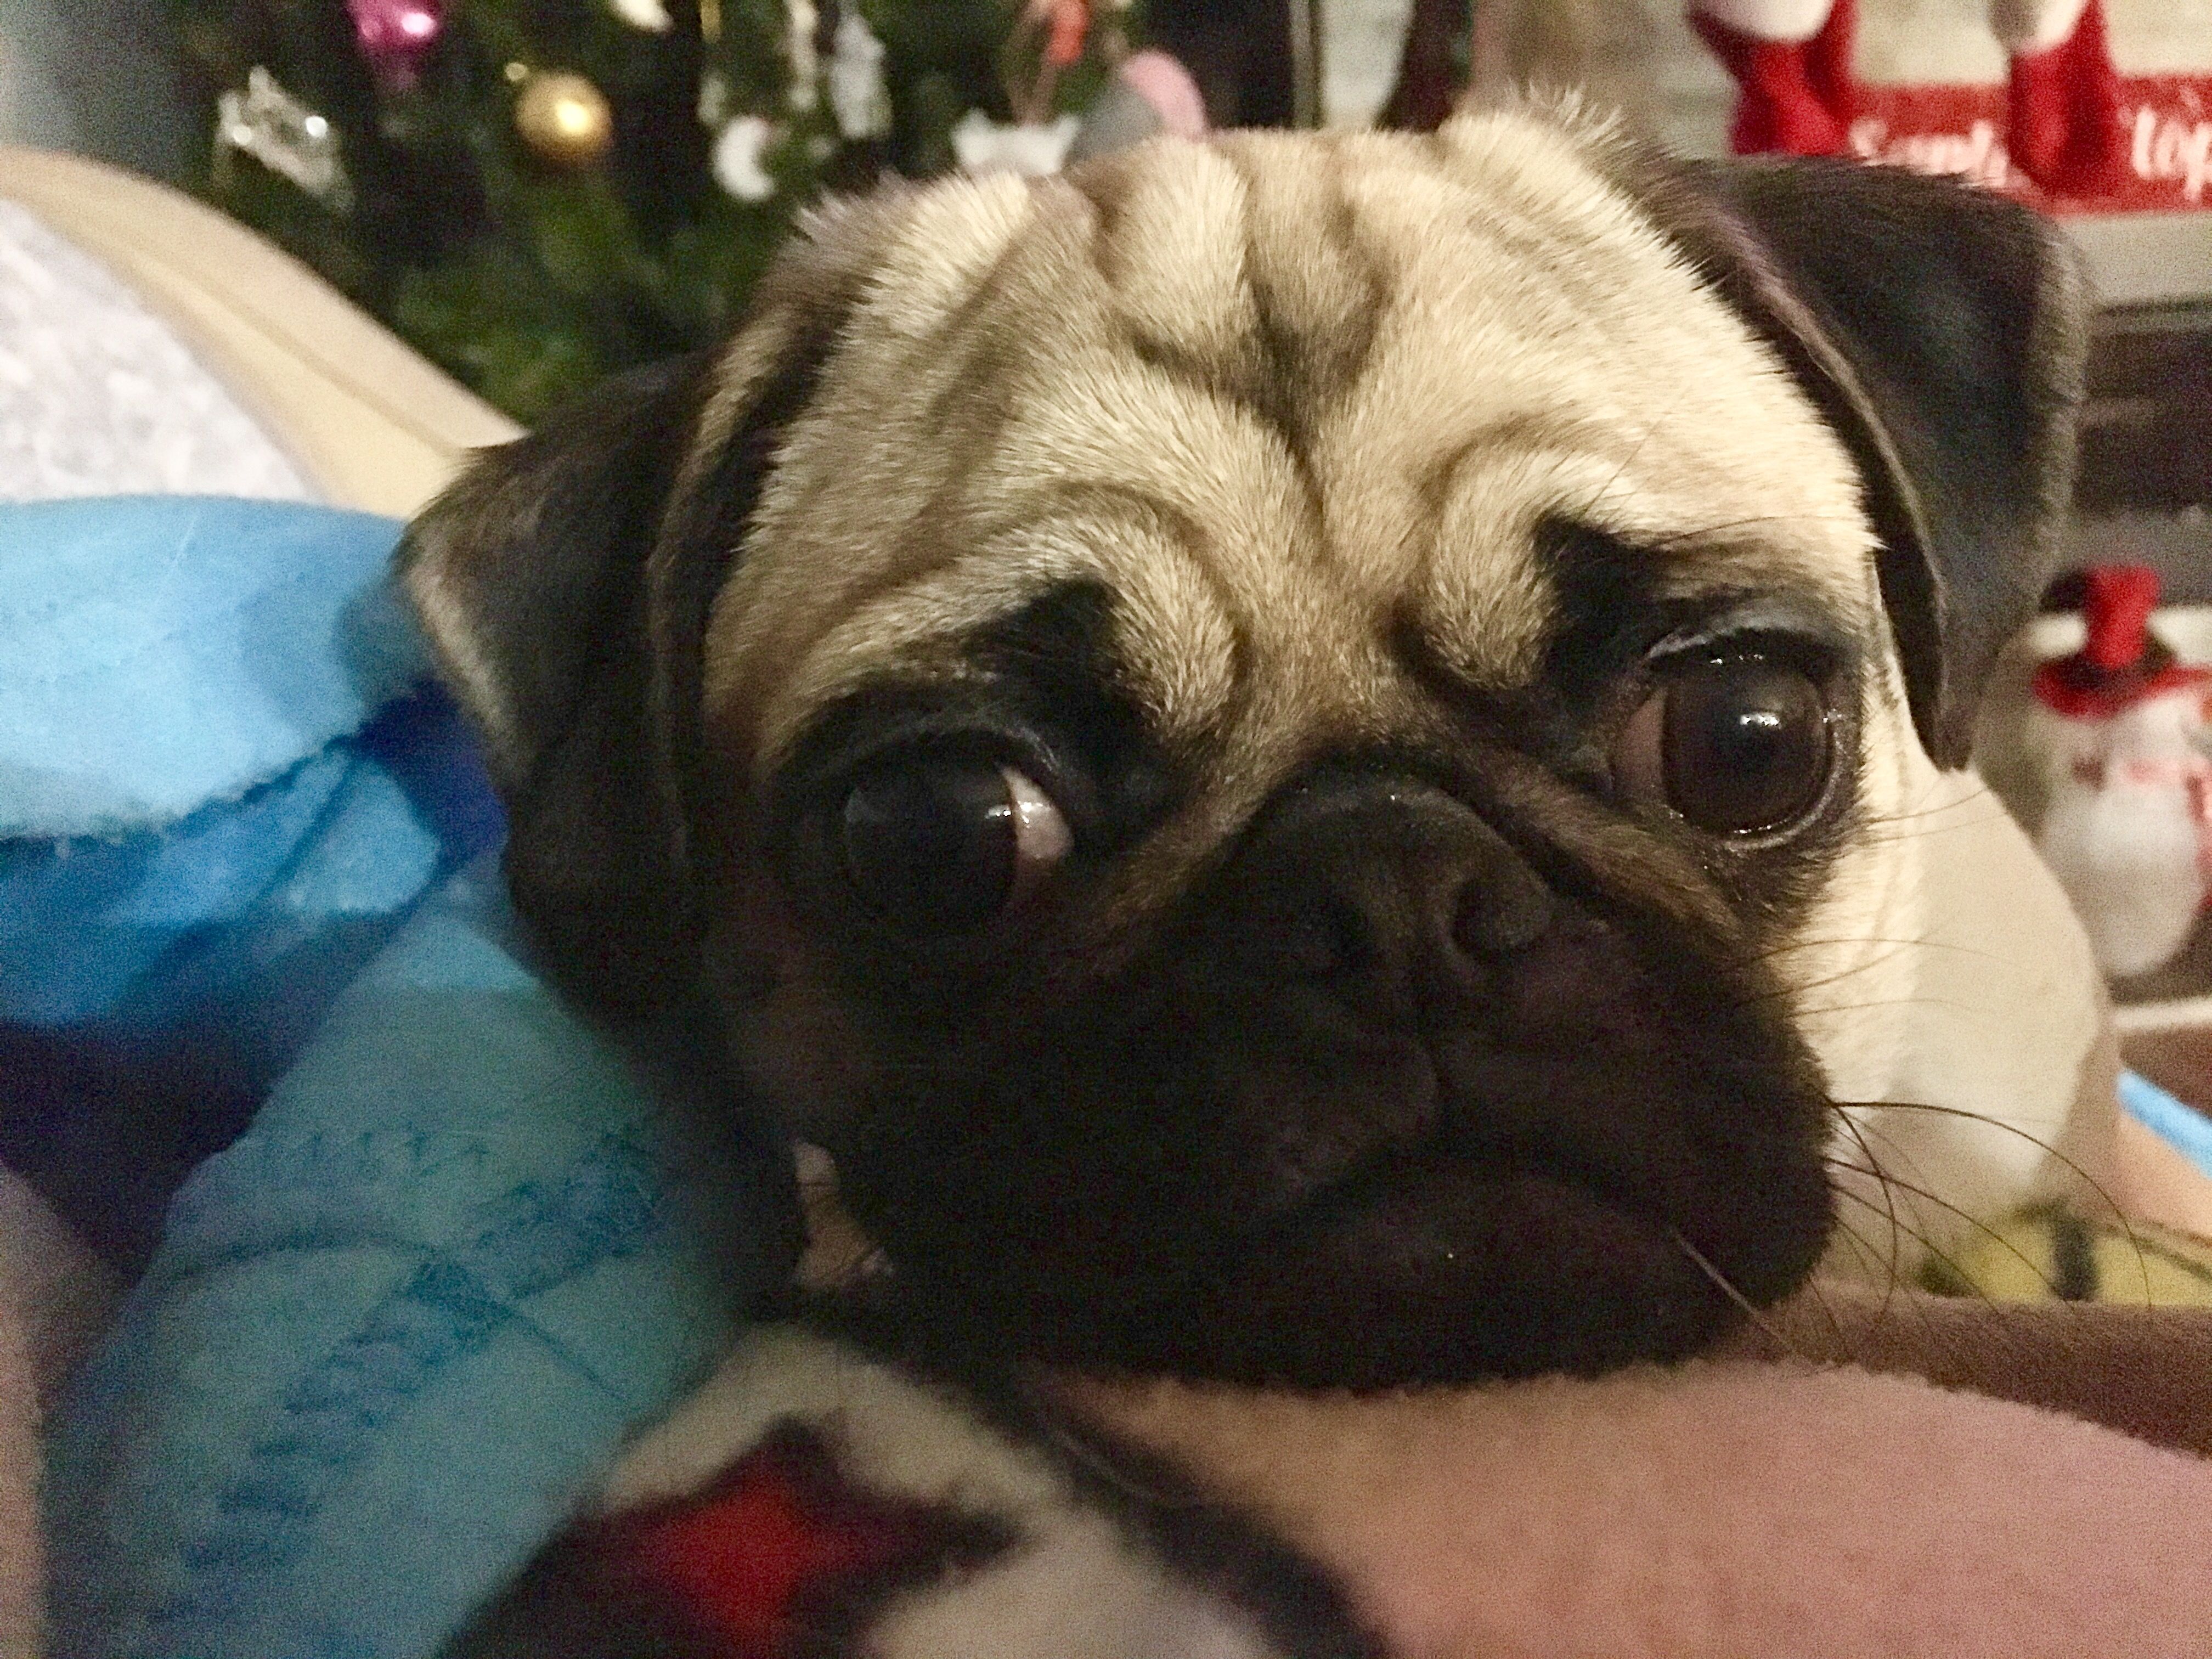 Pug's sad face on top of the blanket